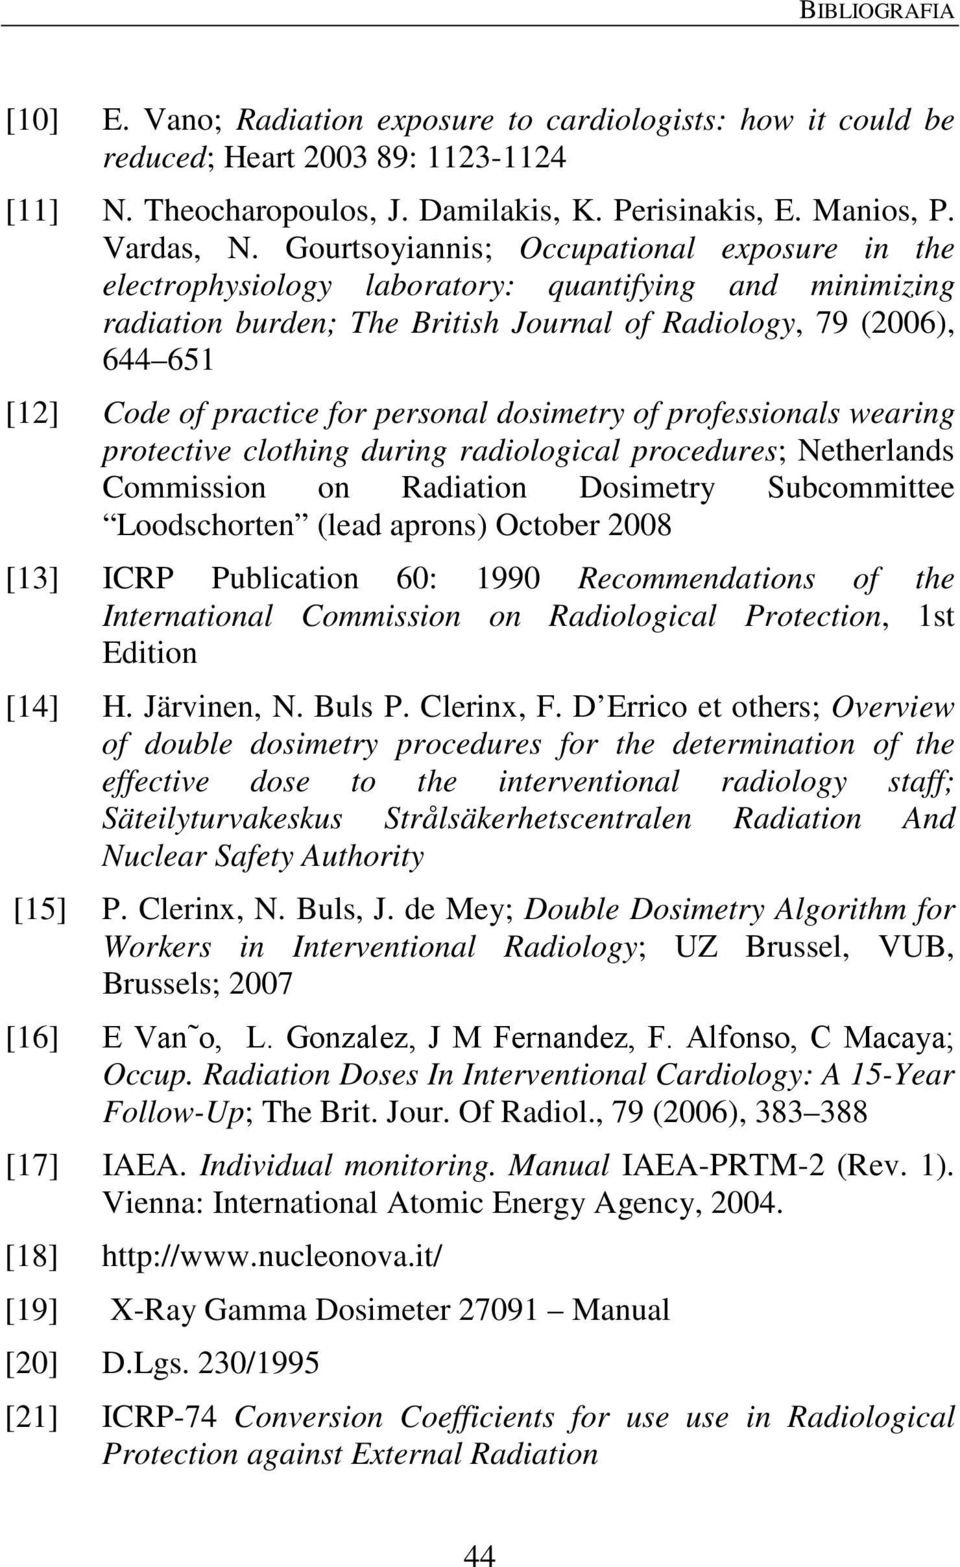 personal dosimetry of professionals wearing protective clothing during radiological procedures; Netherlands Commission on Radiation Dosimetry Subcommittee Loodschorten (lead aprons) October 2008 [13]